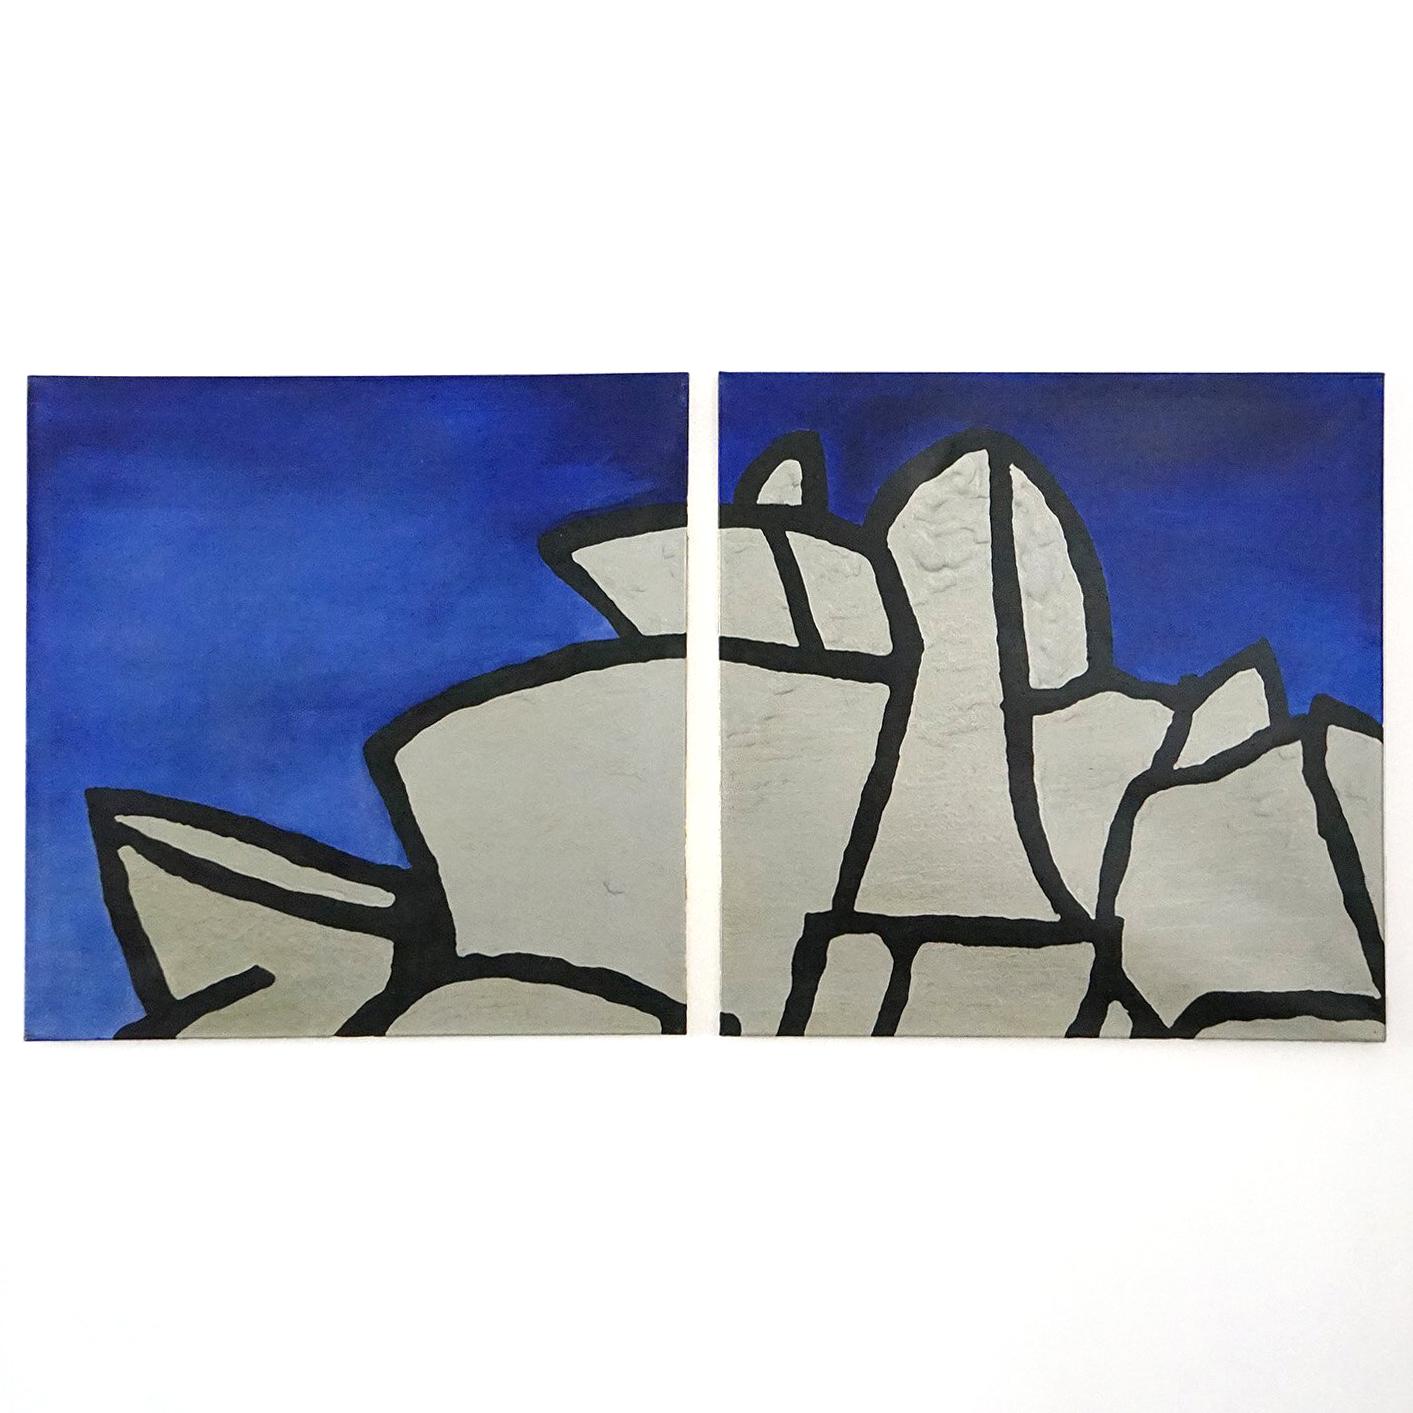 Pair of Original Oil on Canvas Paintings Inspired by the Architecture of Frank Gehry

Sladden (1933-2020) originally trained as an Architect at the RWA (Royal West of England Academy) he later moved into sculpture and then abstract painting always